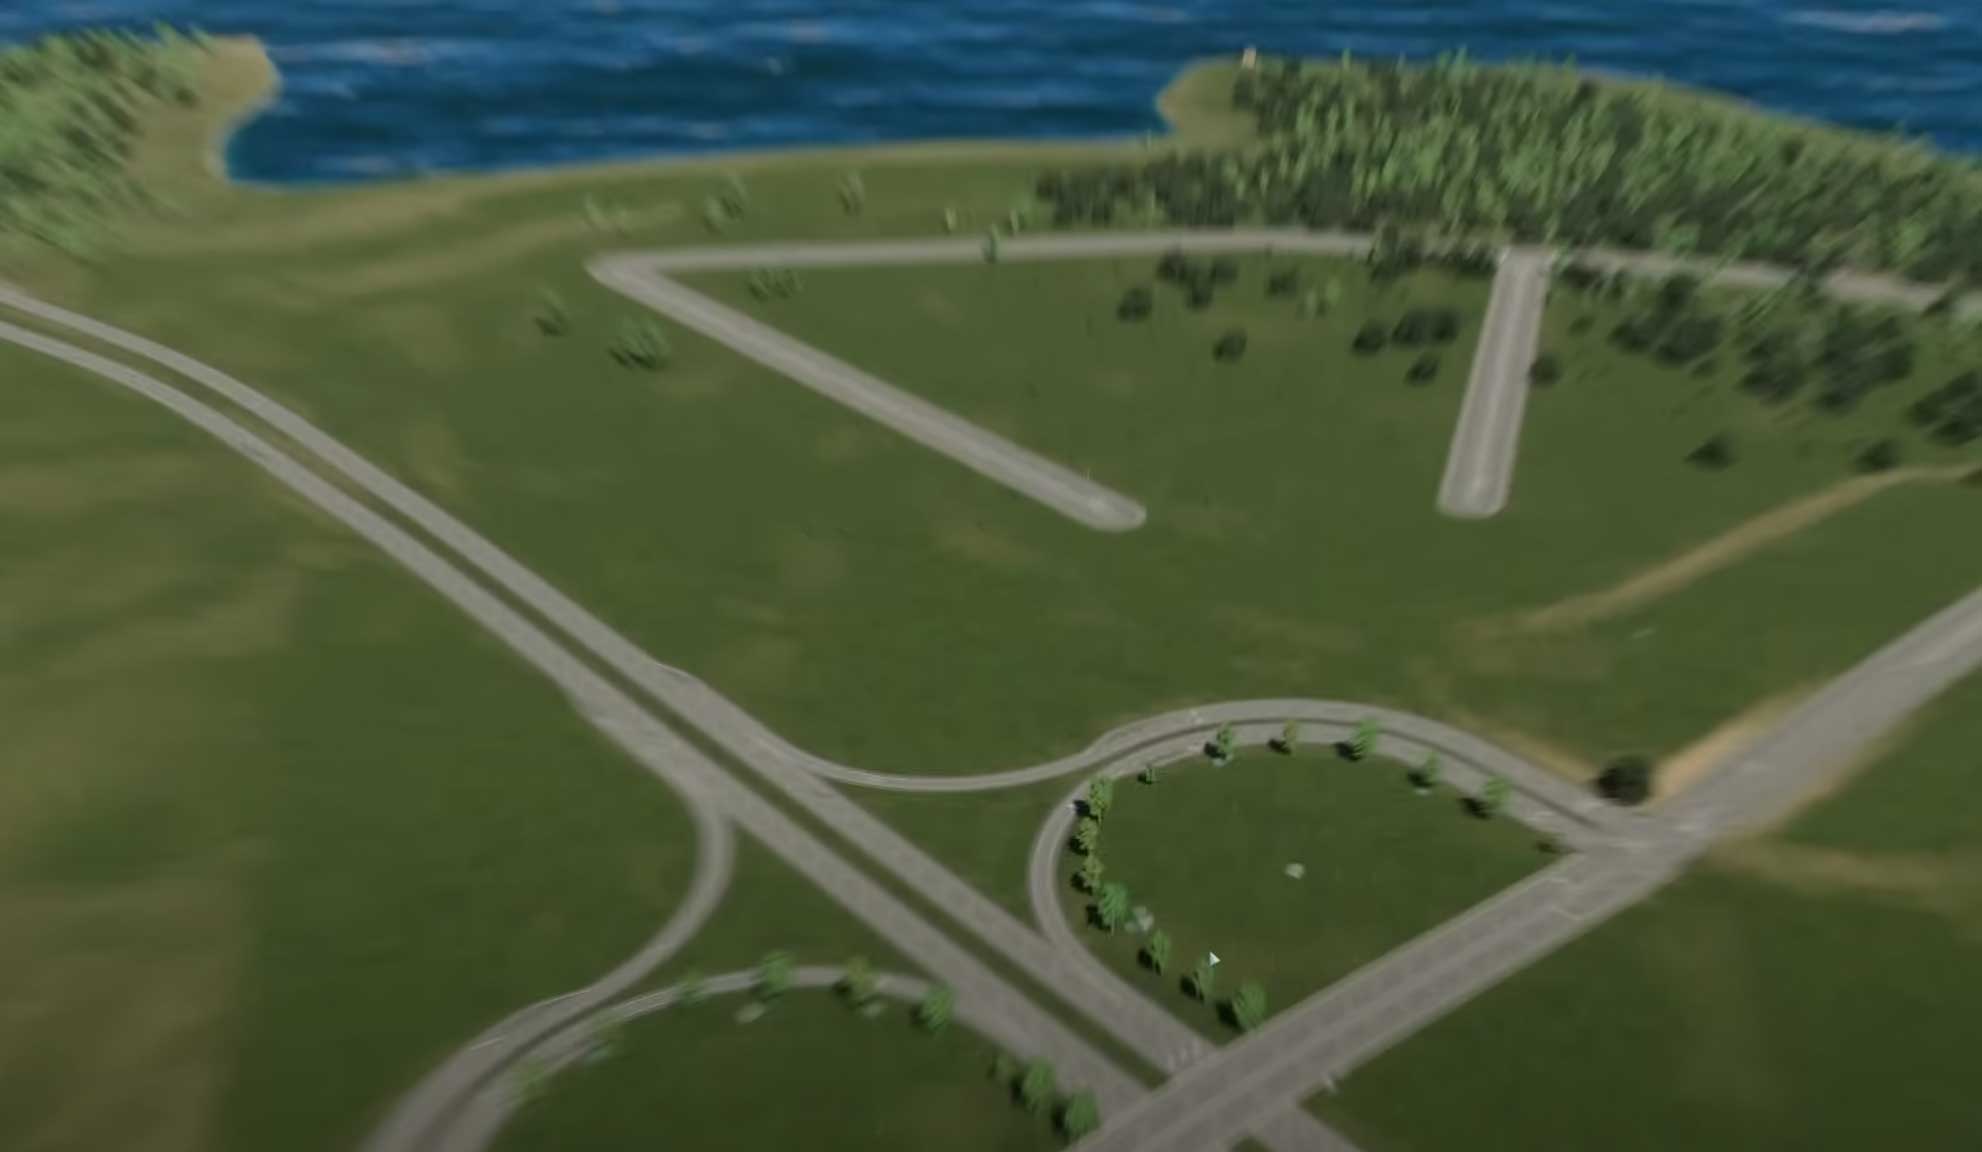 Blurry or Pixelated Issue on Cities Skylines 2